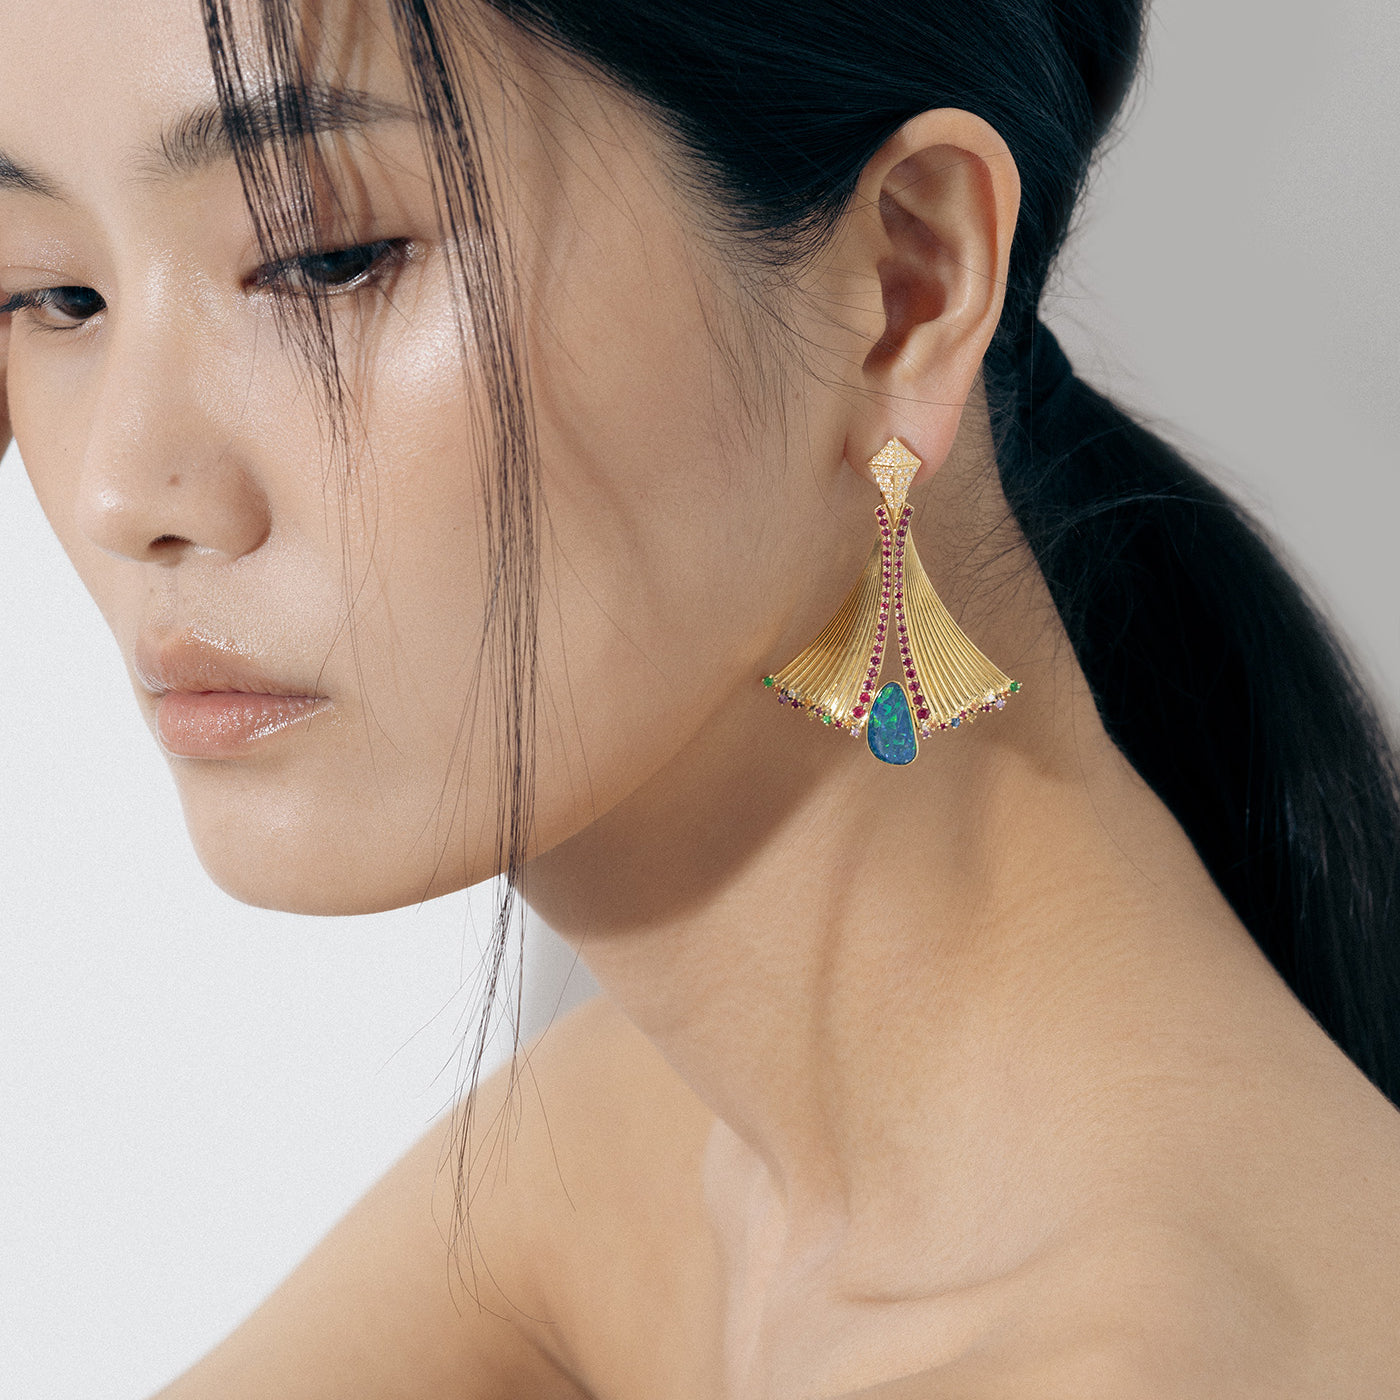 Yellow Gold Earrings with a Black Opal, Diamonds, and Colored Sapphires - Model shot